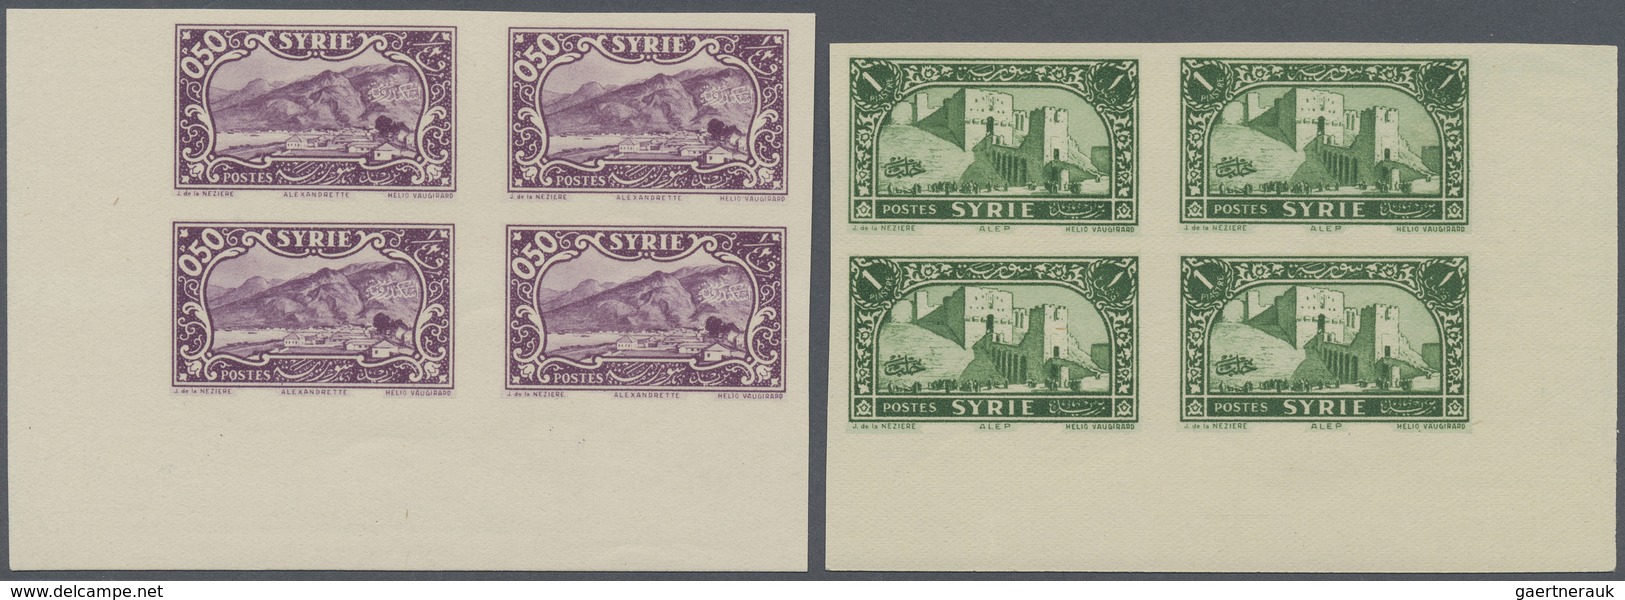 ** Syrien: 1930/1936, Definitives "Views of Syria", complete set of 23 values, marginal IMPERFORATE blo